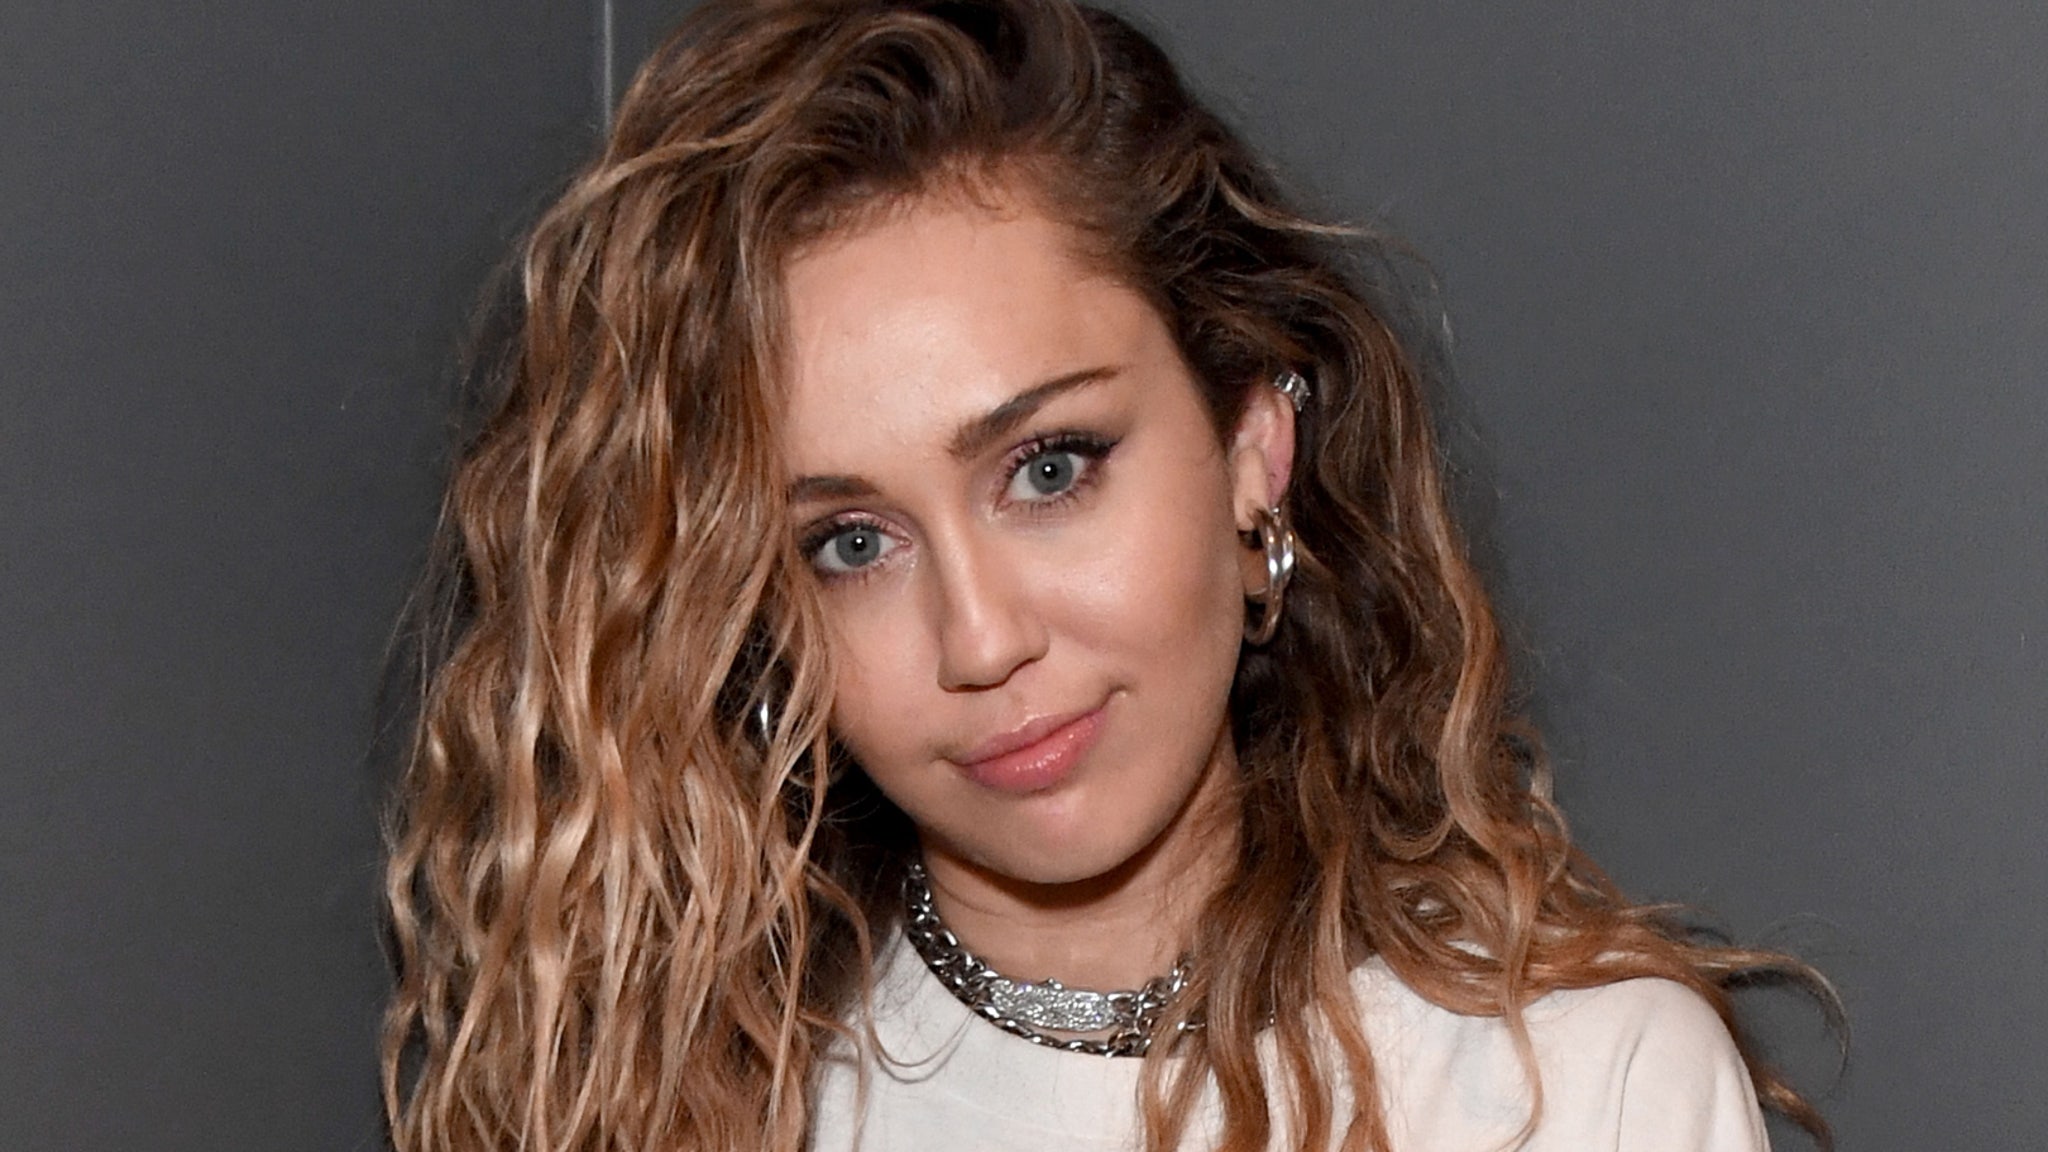 Miley Cyrus, 23 Other Celebrities Reveal When They Lost Their Virginity